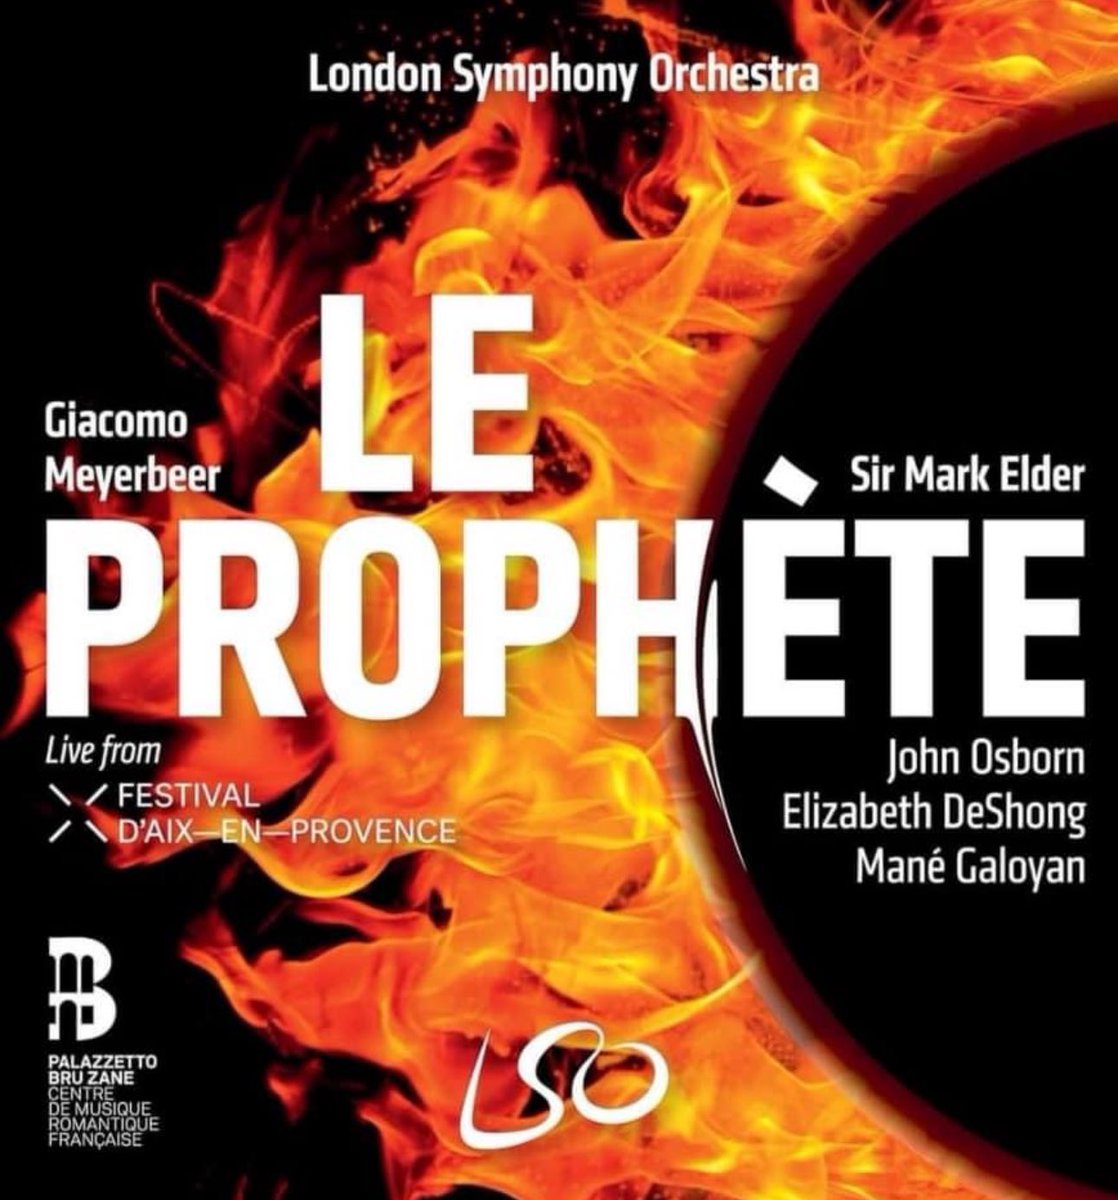 *NEW RELEASE* June 28th is the official release date of our LIVE recording of Meyerbeer’s LE PROPHÈTE with Sir Mark Elder and @londonsymphony ! Presale will be available from May 17th. #newrelease #meyerbeer #Fidès #operainconcert #liverecording